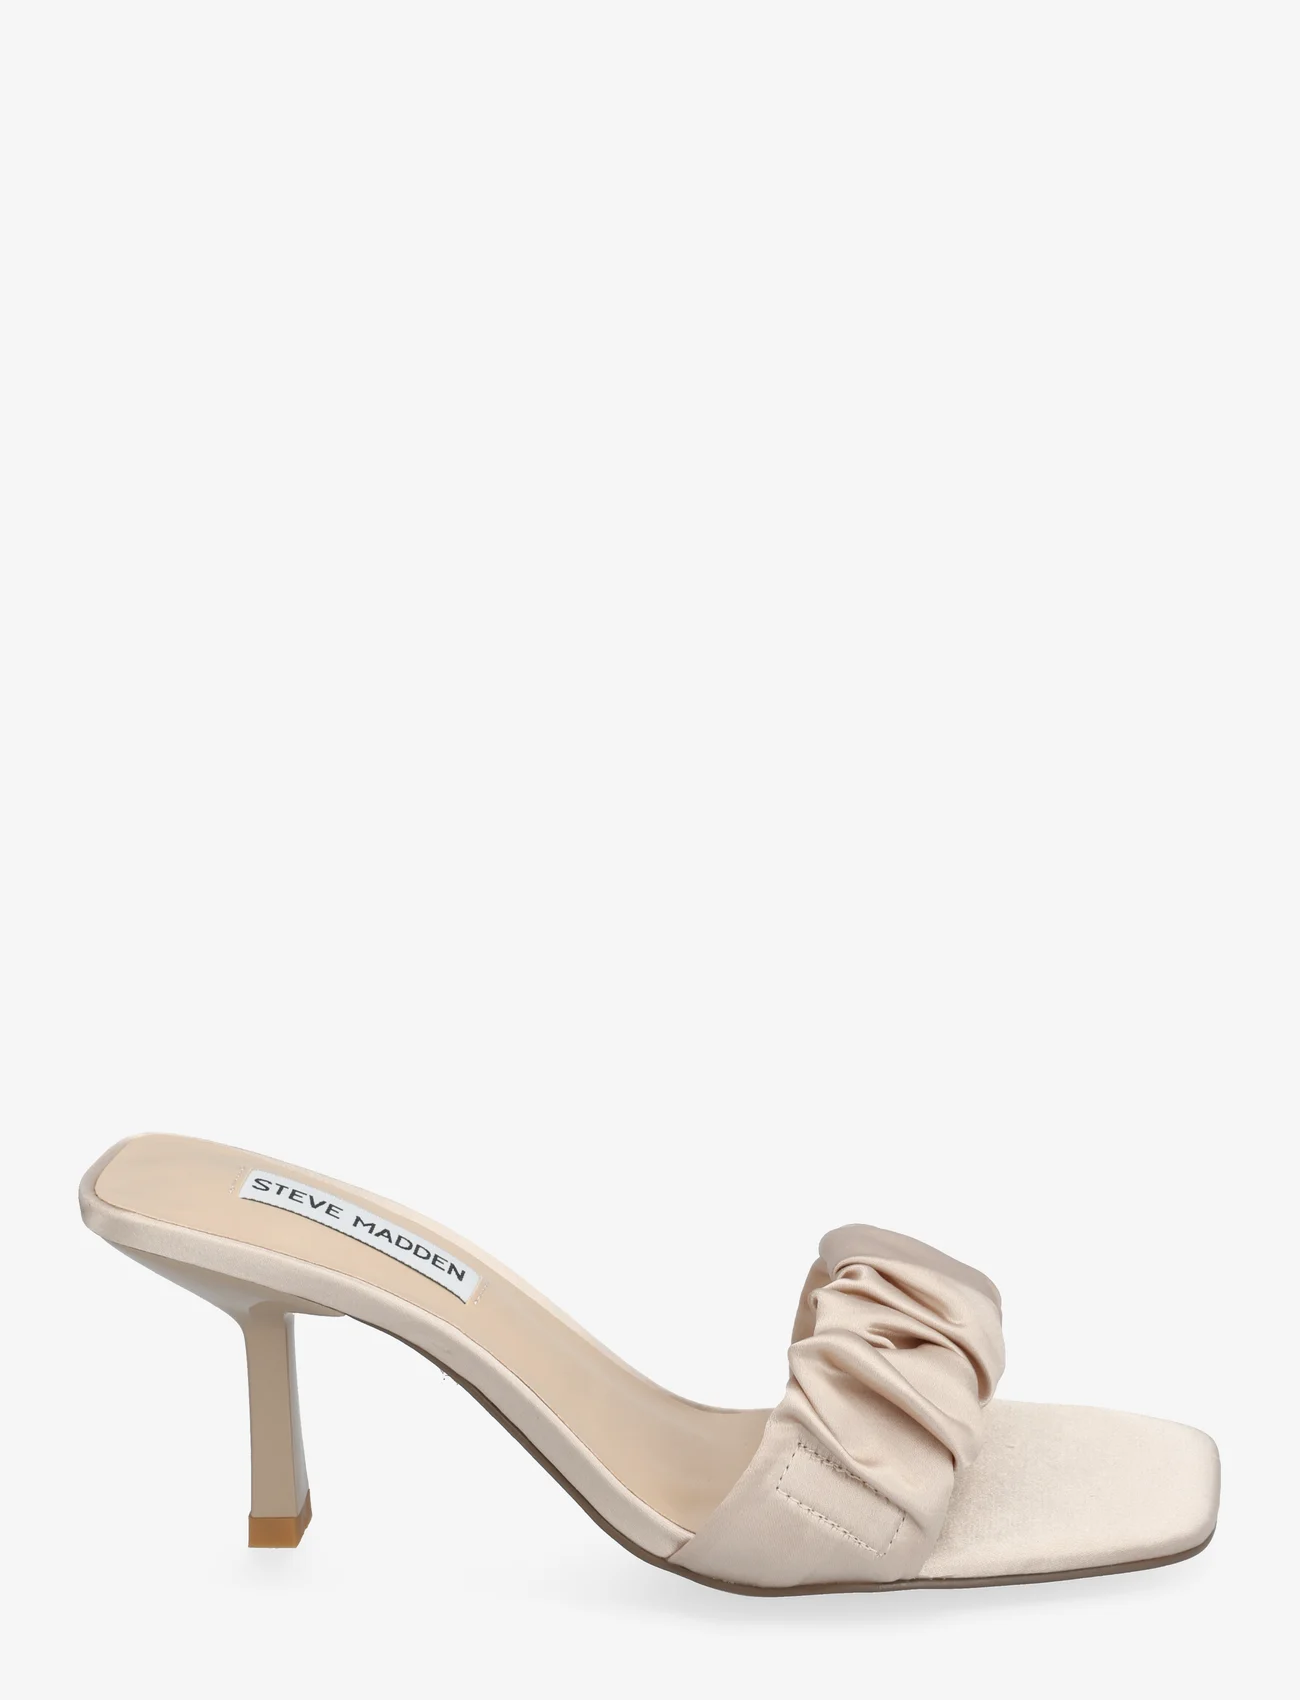 Steve Madden - Truley Sandal - party wear at outlet prices - nude satin - 1